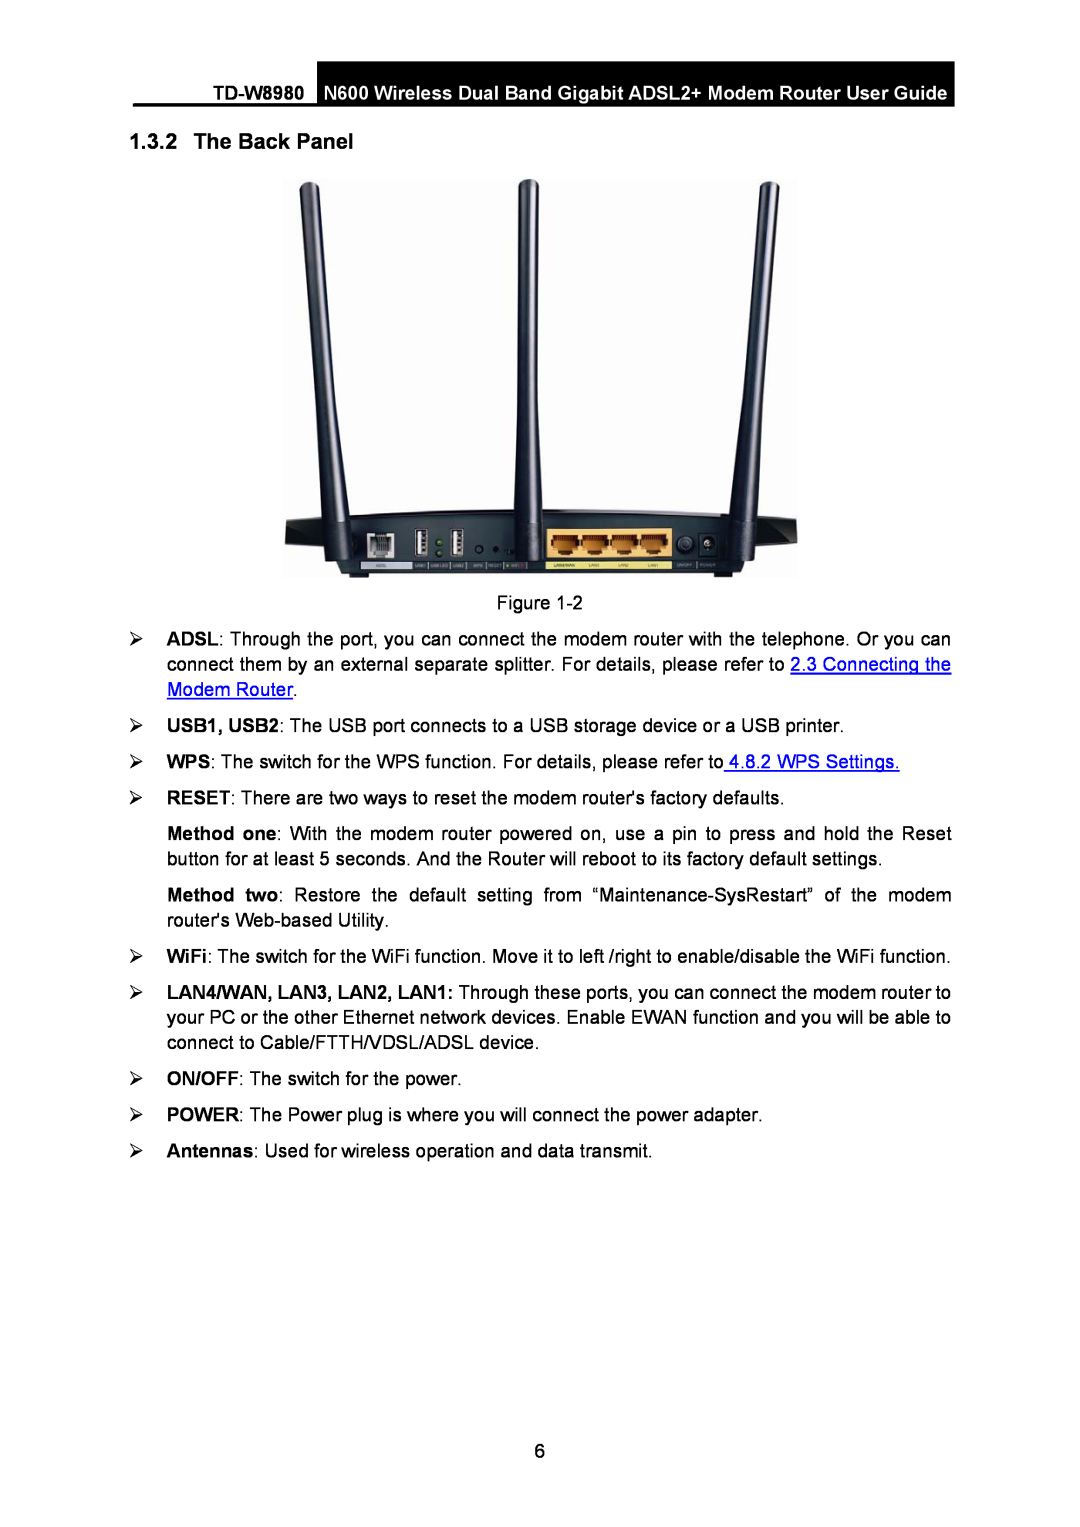 TP-Link TD-W8980 manual The Back Panel, N600 Wireless Dual Band Gigabit ADSL2+ Modem Router User Guide 